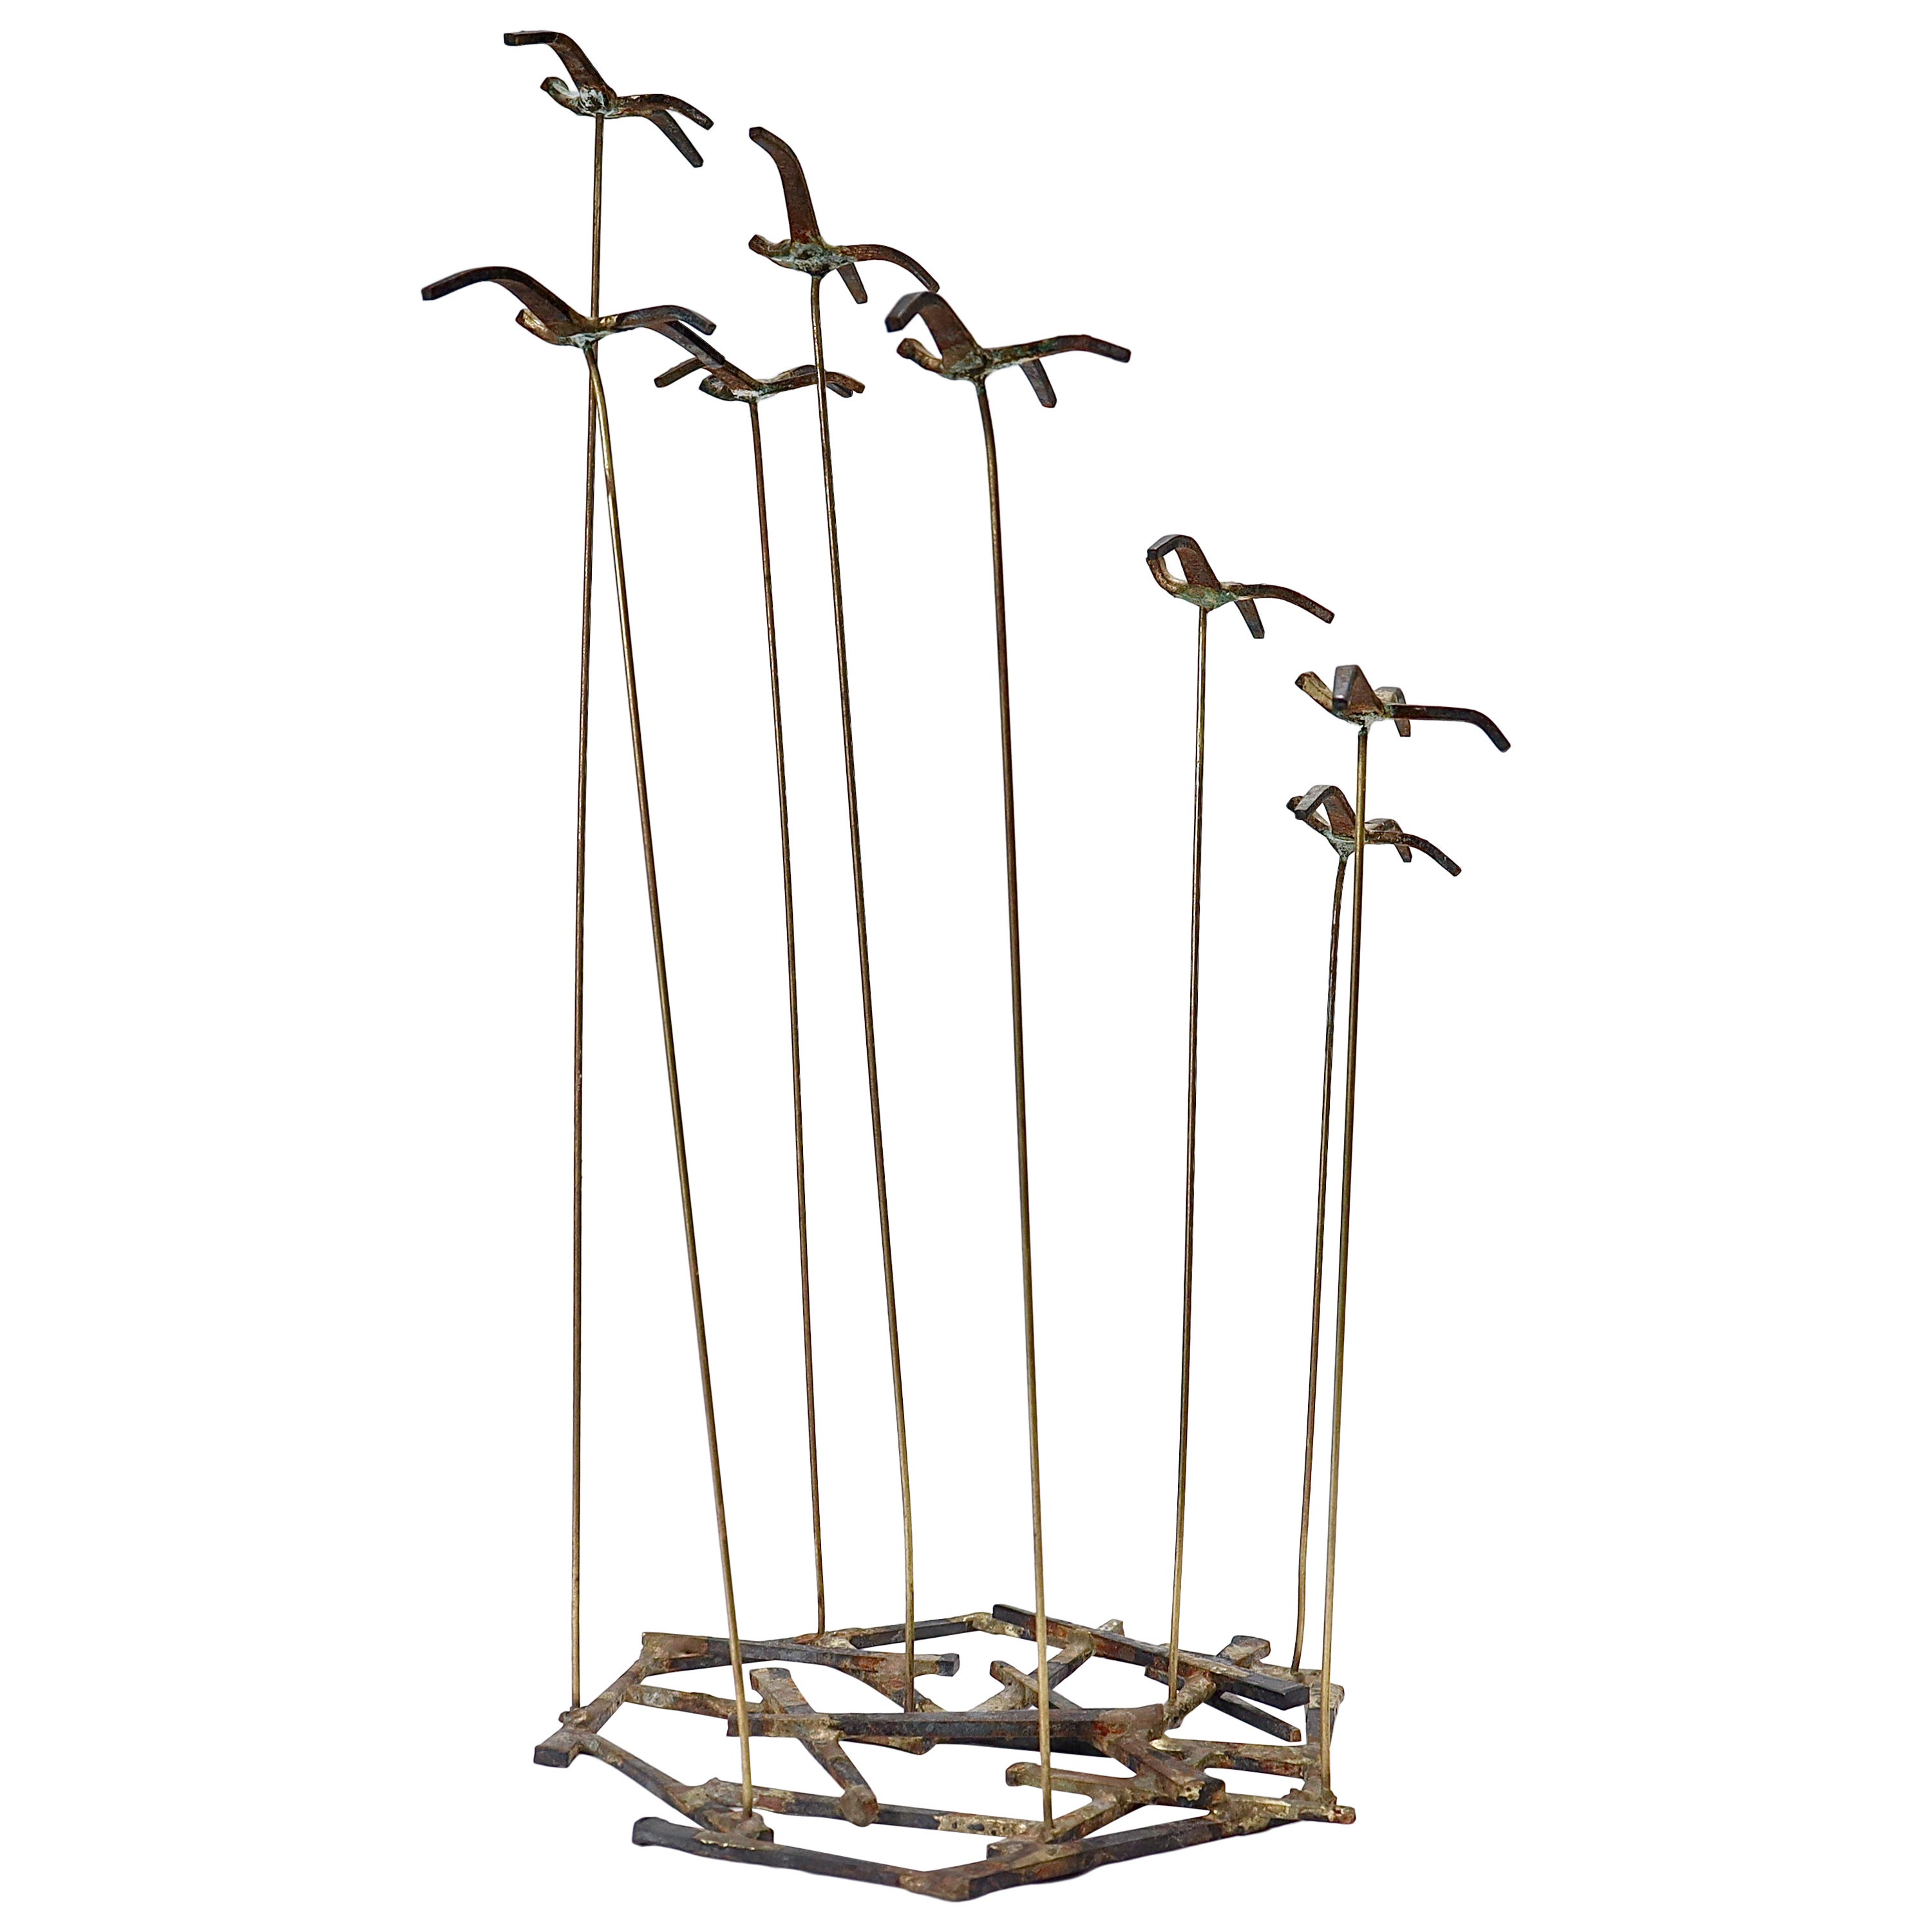 Vintage Mid-Century Modern Cut Square Nail Curtis Jere Style Birds Sculpture  For Sale